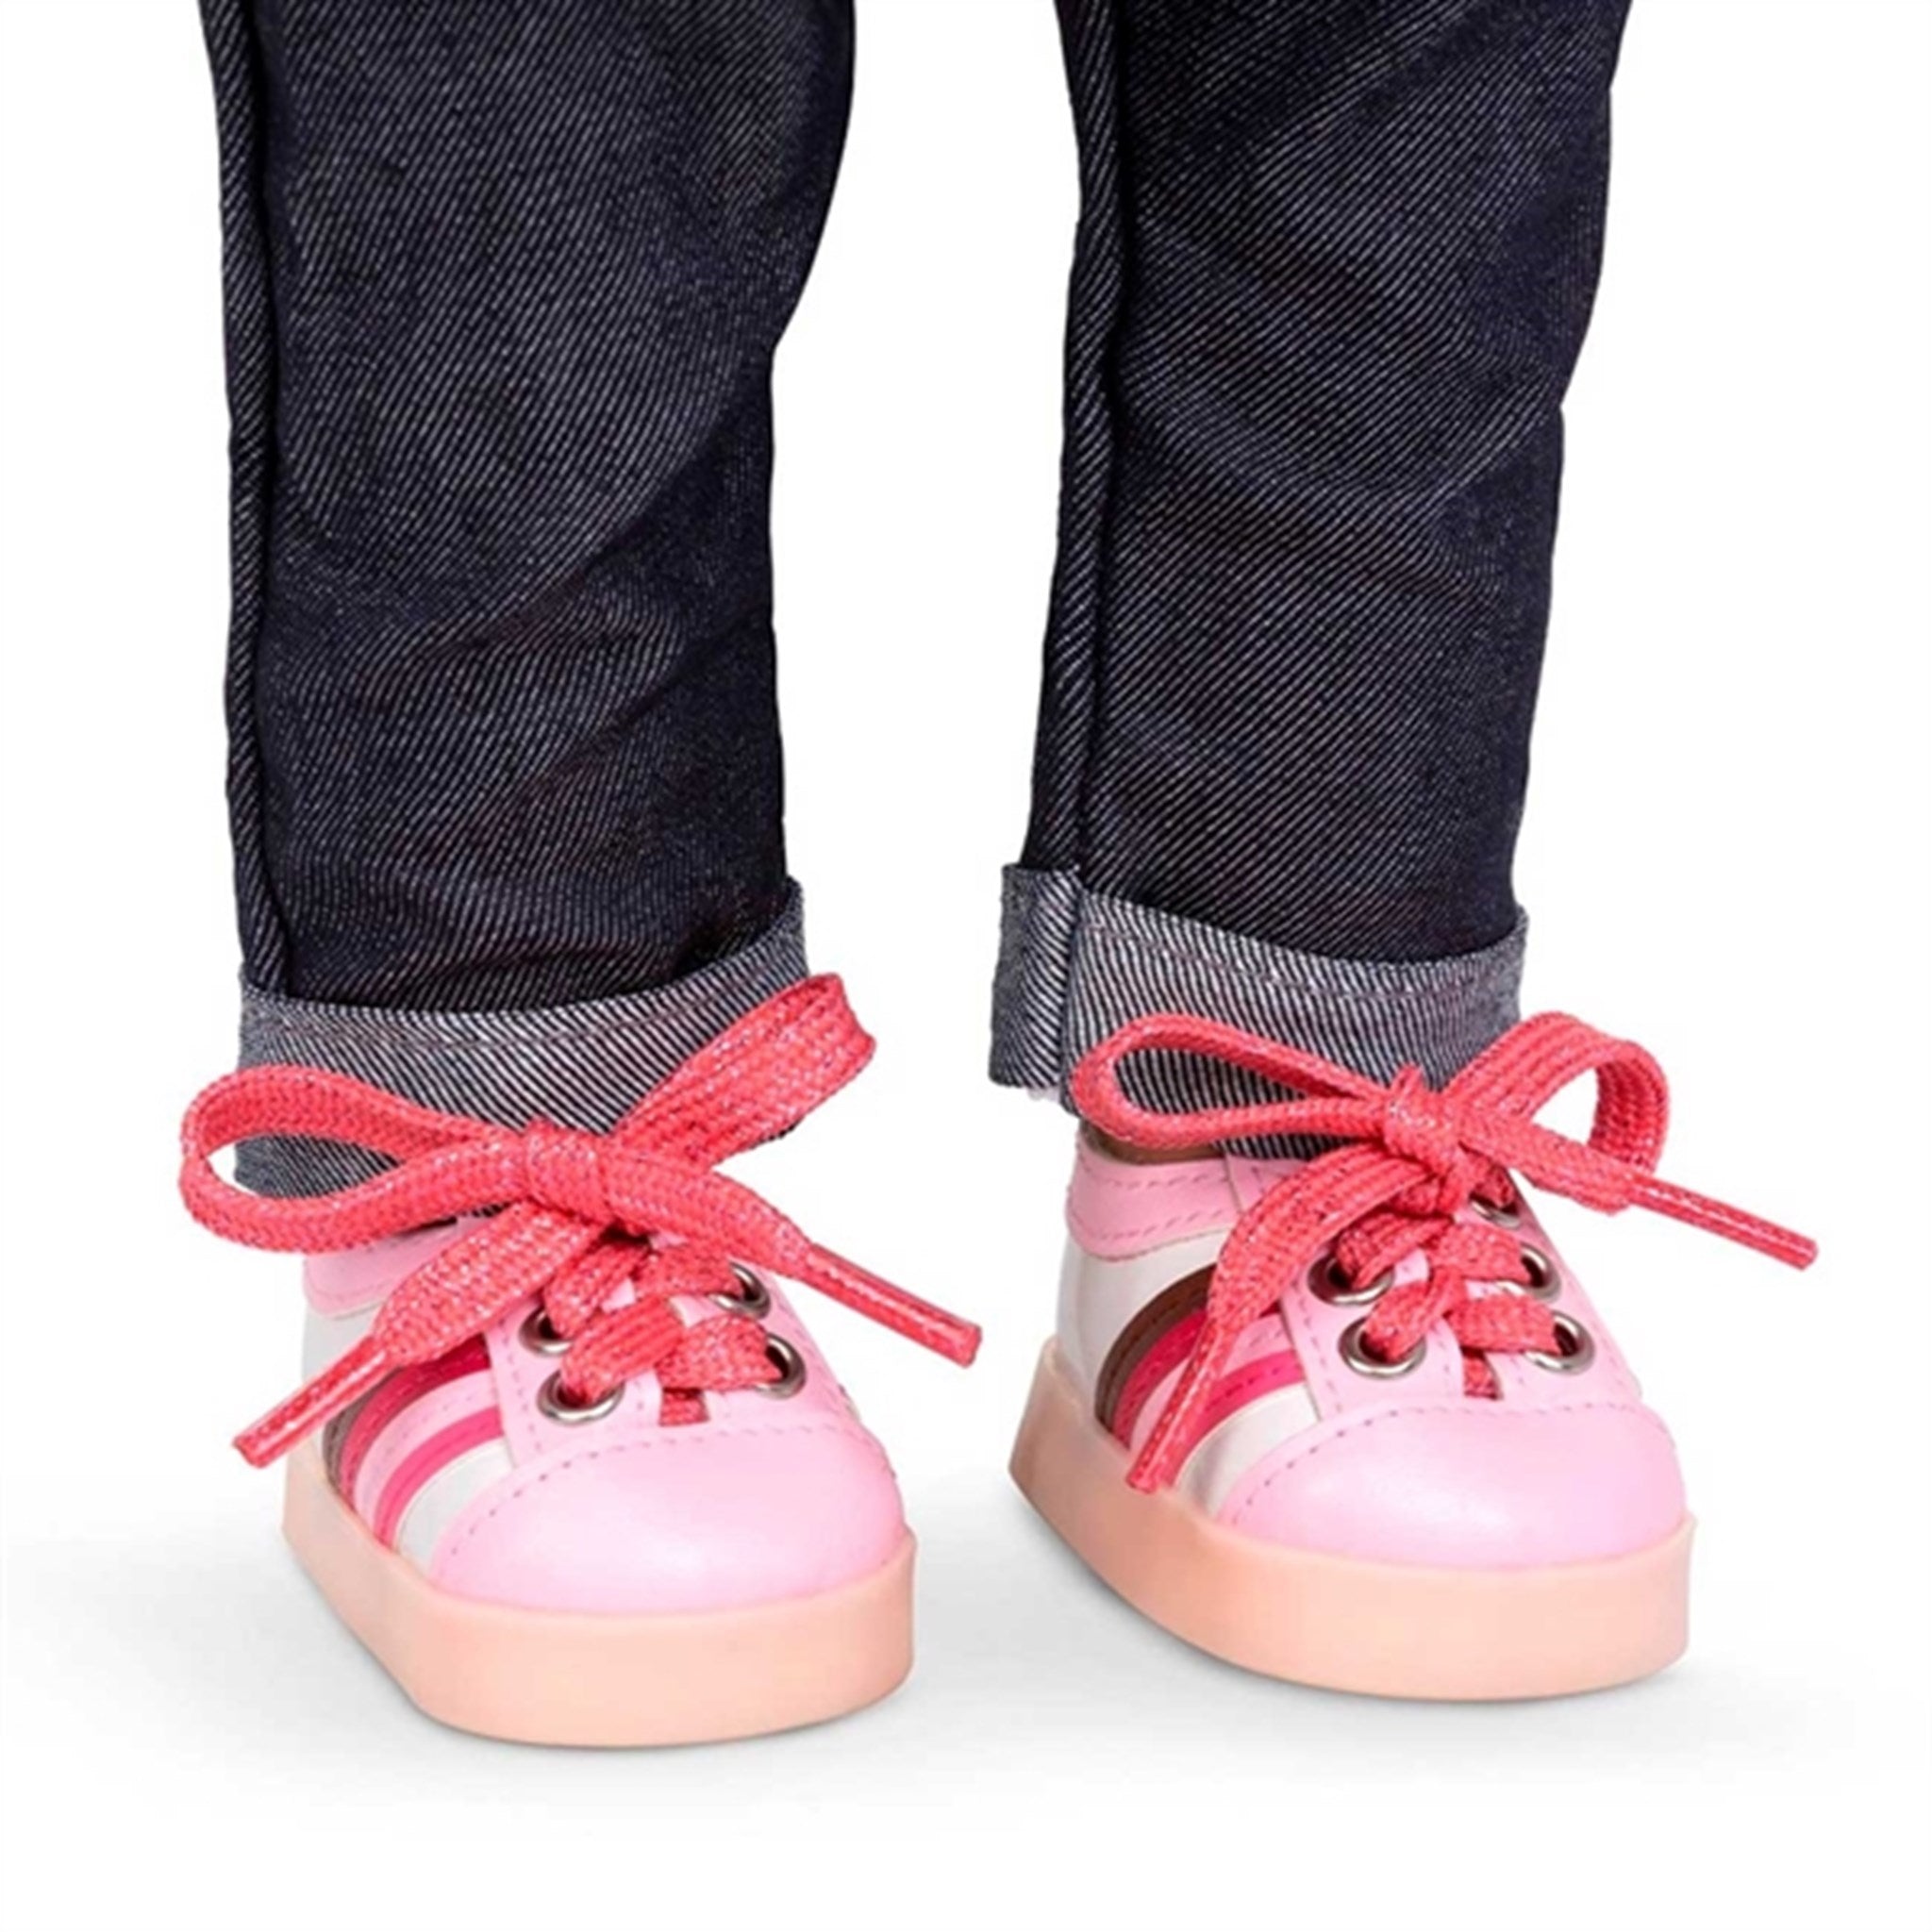 Our Generation Doll Shoes w. Light Pink 3